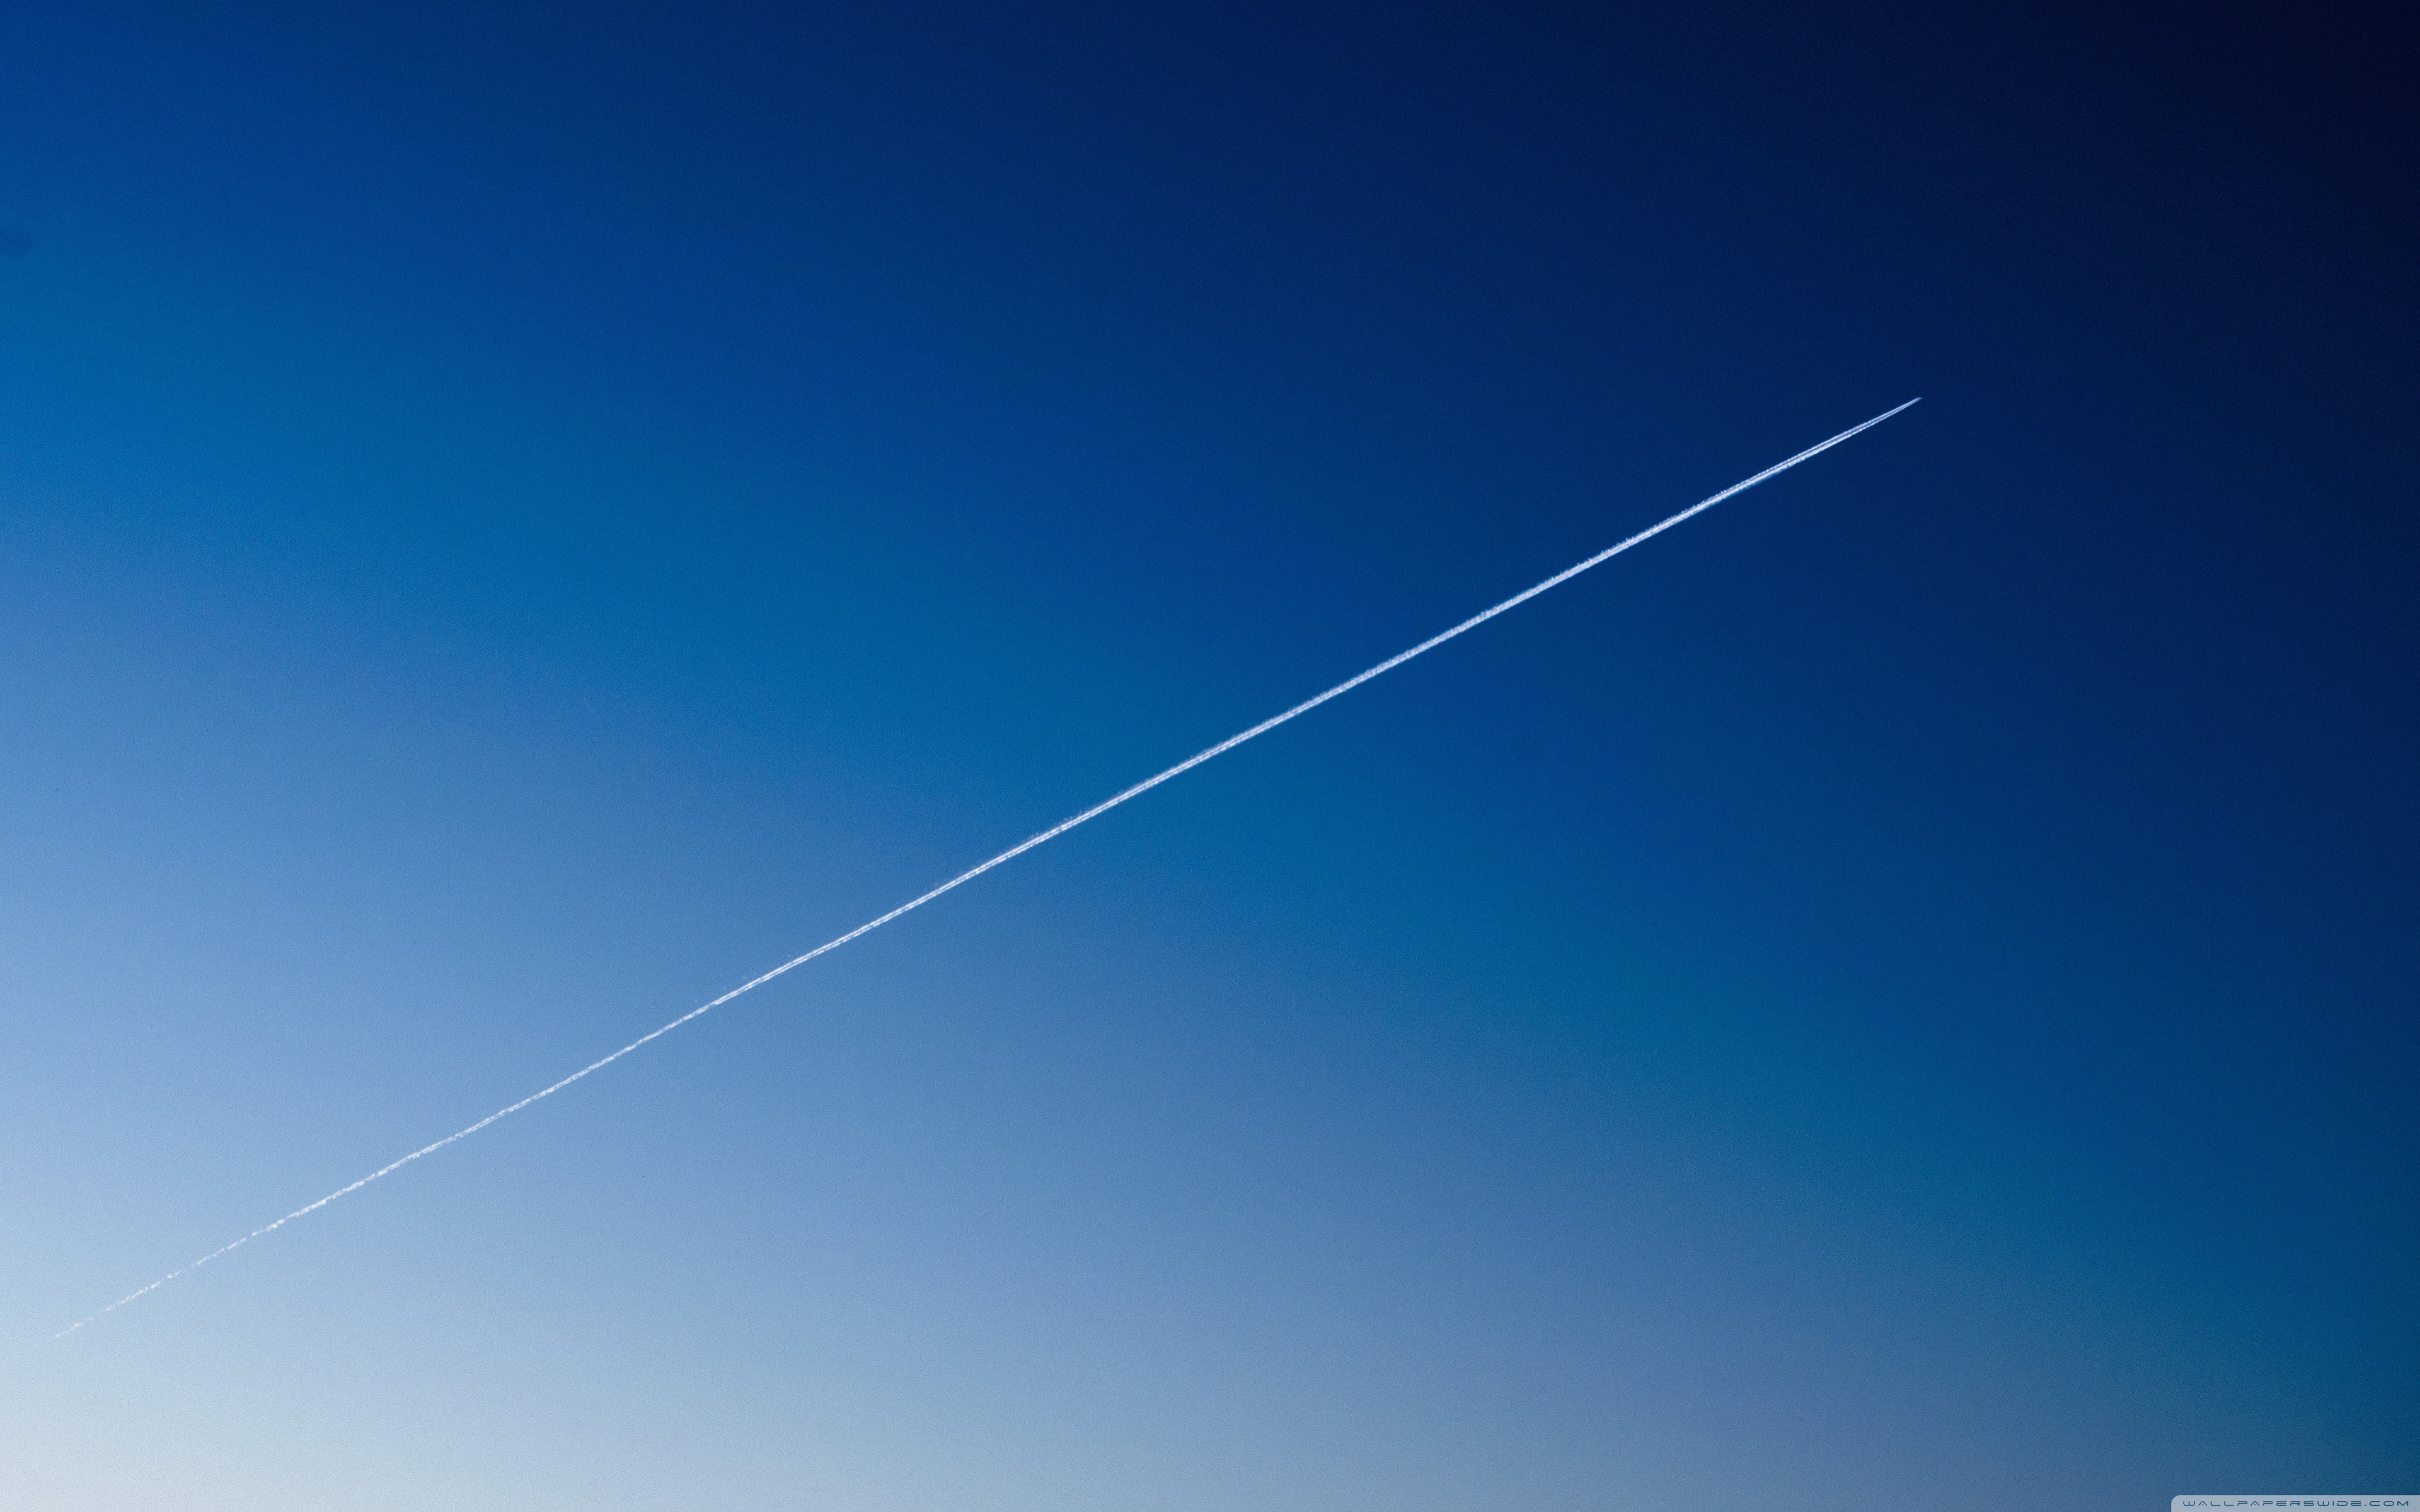 Sky Gradient. And Trace of an Airplane Ultra HD Desktop Background Wallpaper  for : Widescreen & UltraWide Desktop & Laptop : Multi Display, Dual Monitor  : Tablet : Smartphone